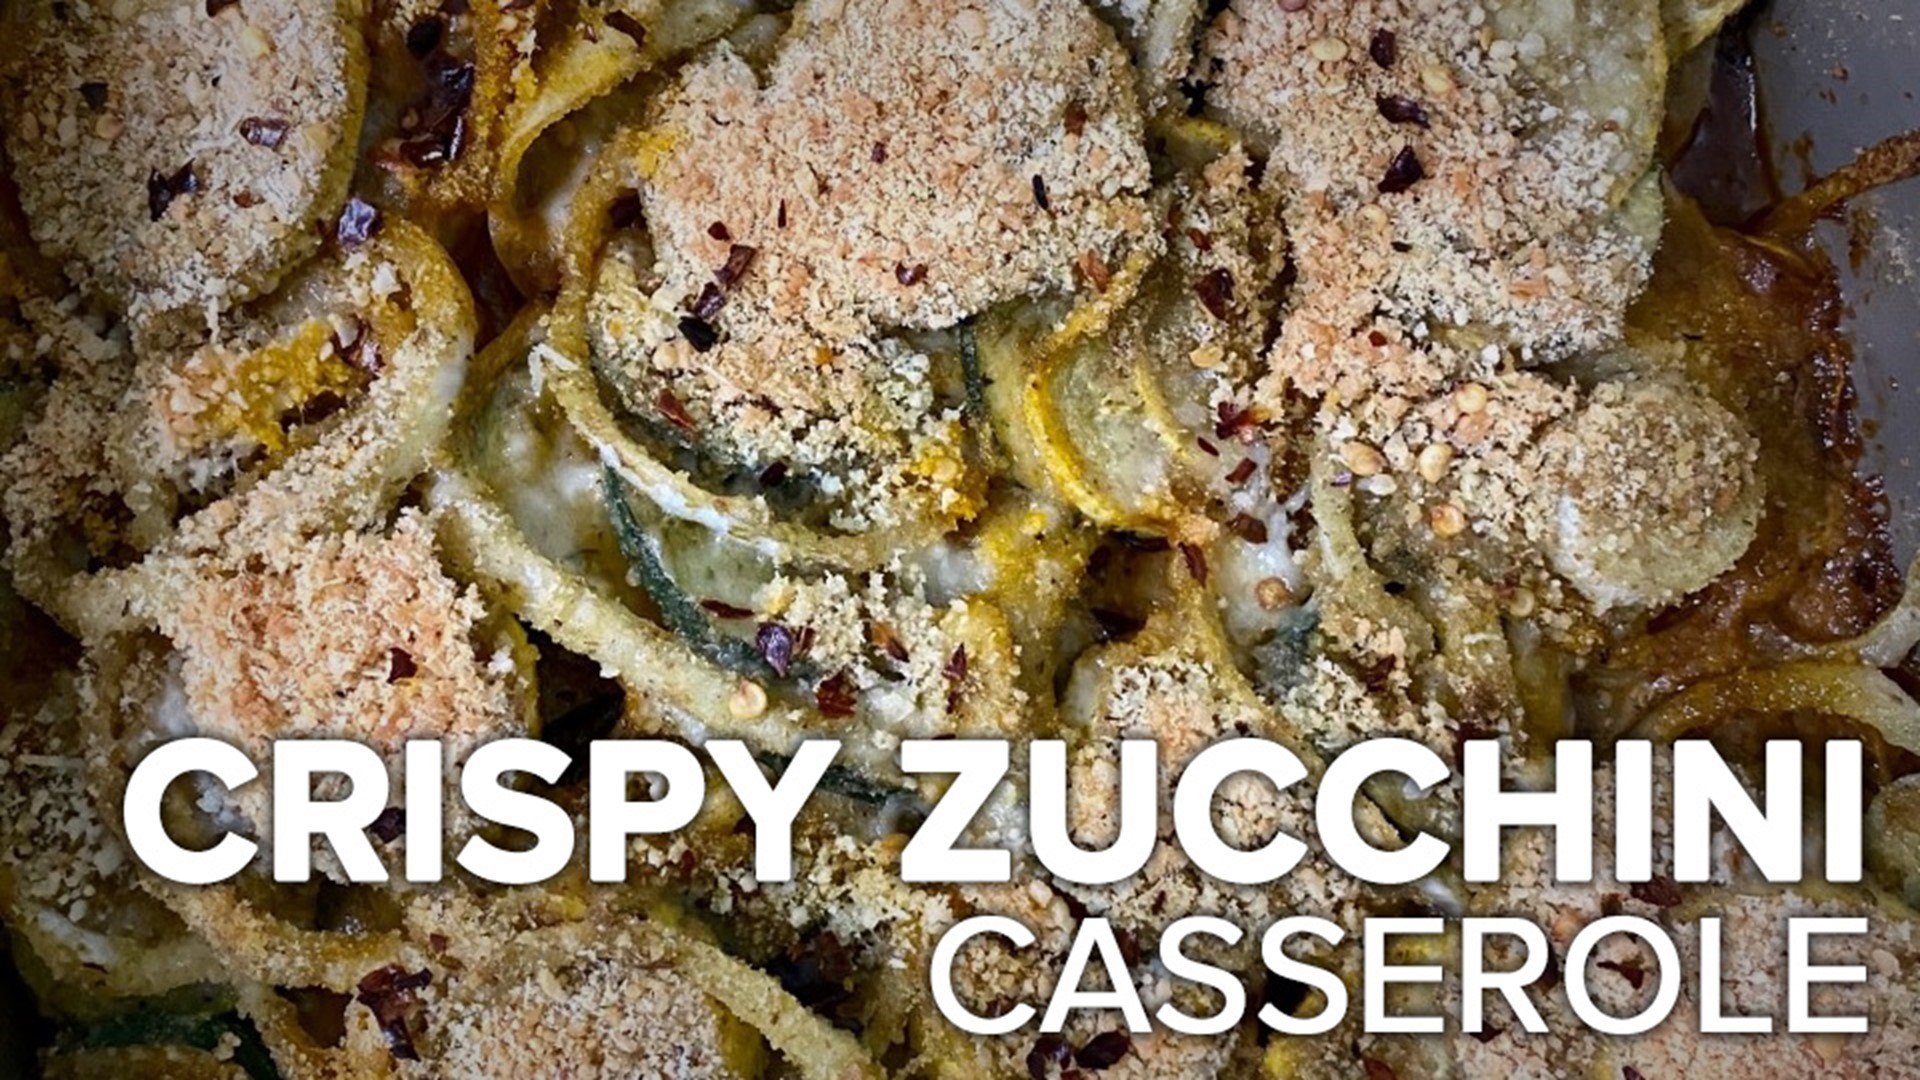 It's almost time for the best zucchini to hit grocery stores! So let's take advantage of that great produce with this crispy zucchini casserole.